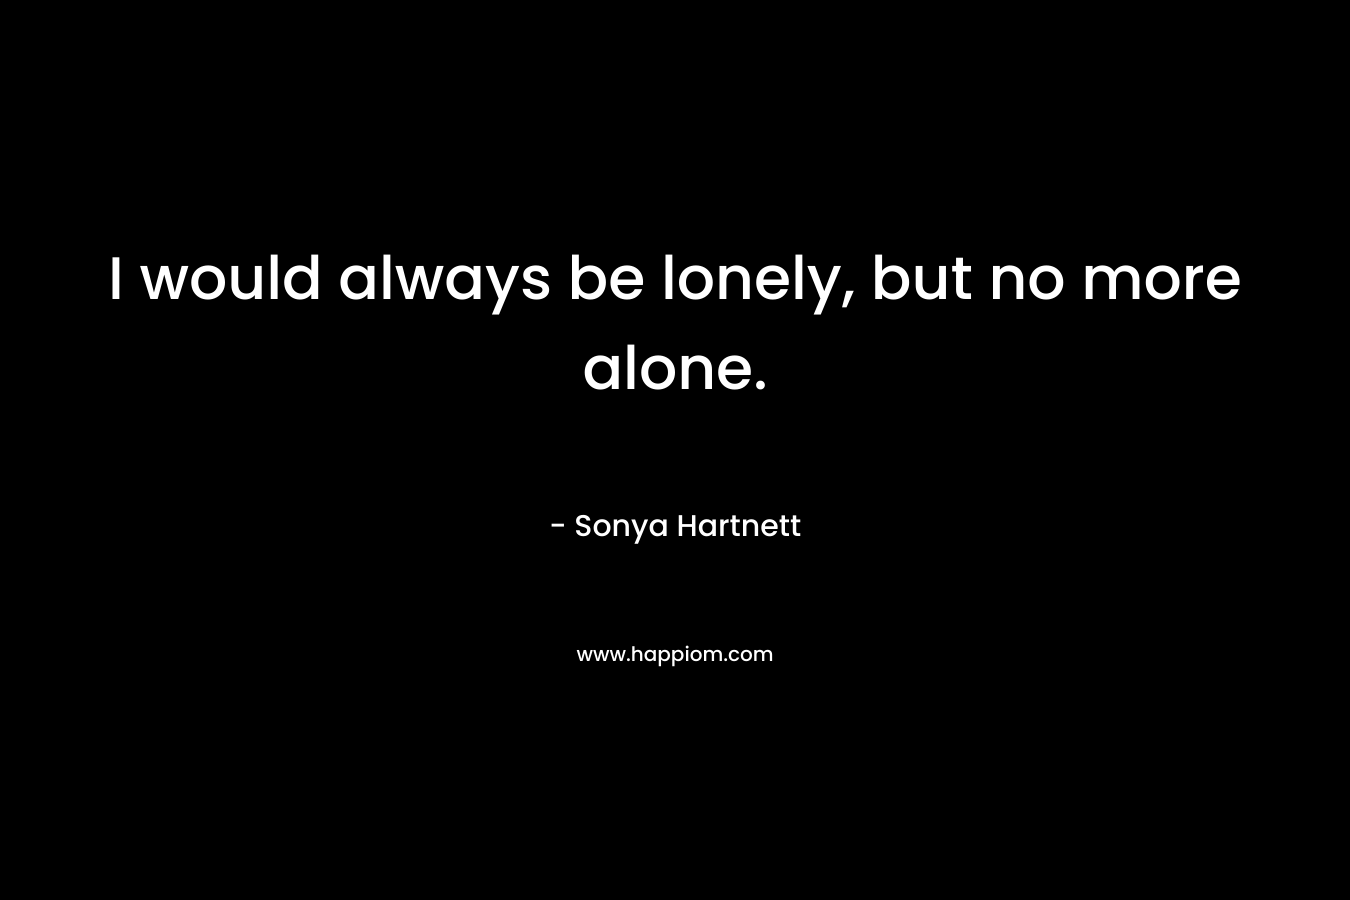 I would always be lonely, but no more alone.